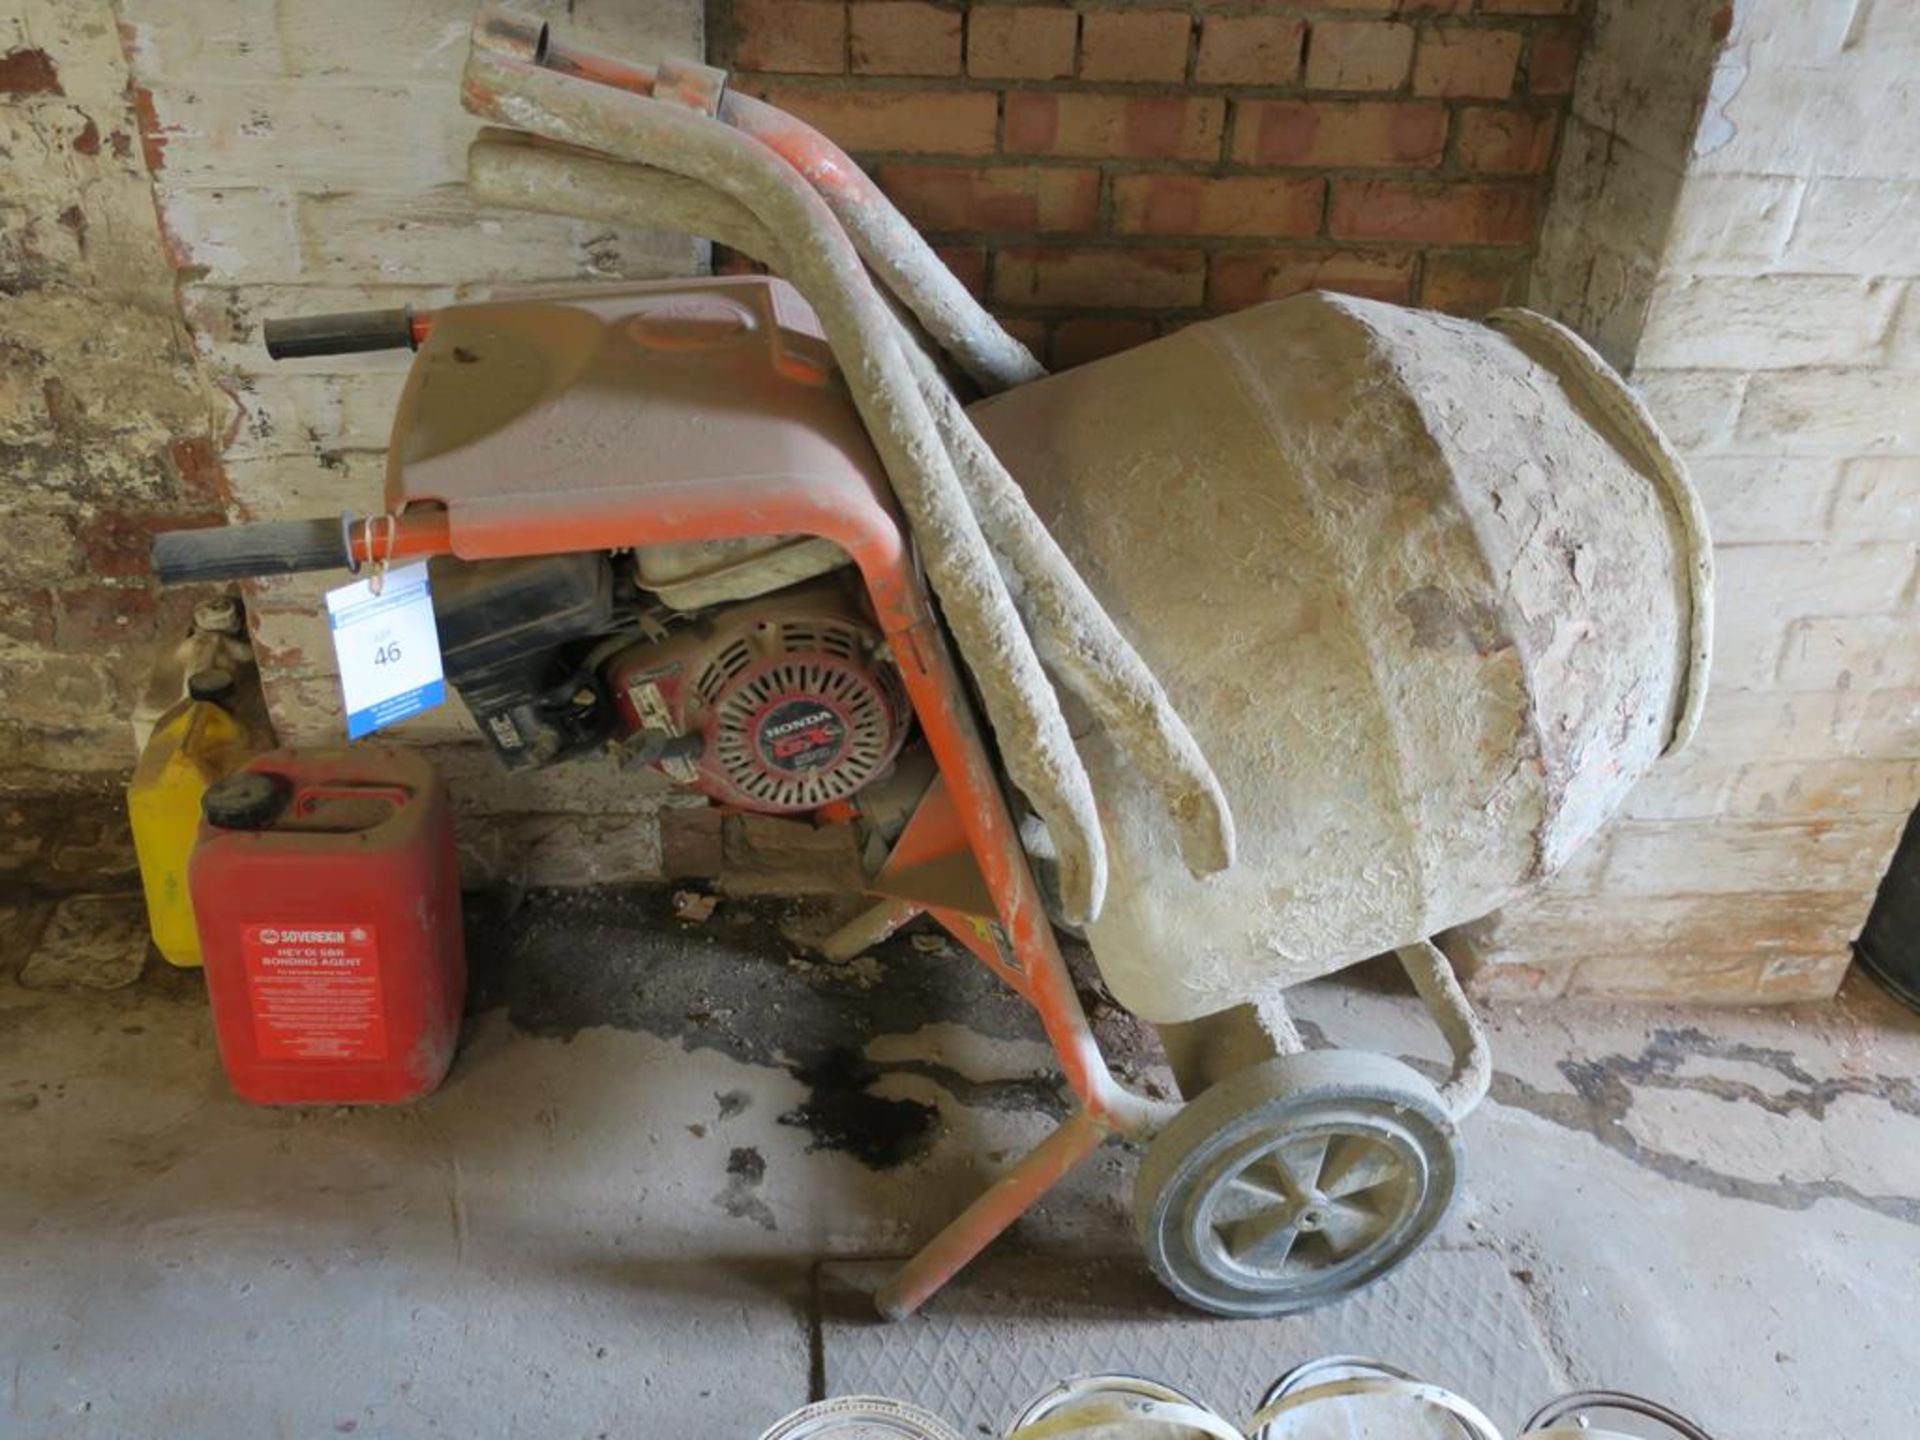 * Belle Minimix 150 Cement Mixer and Stand with Honda GX120 Petrol Engine. Please note this lot is